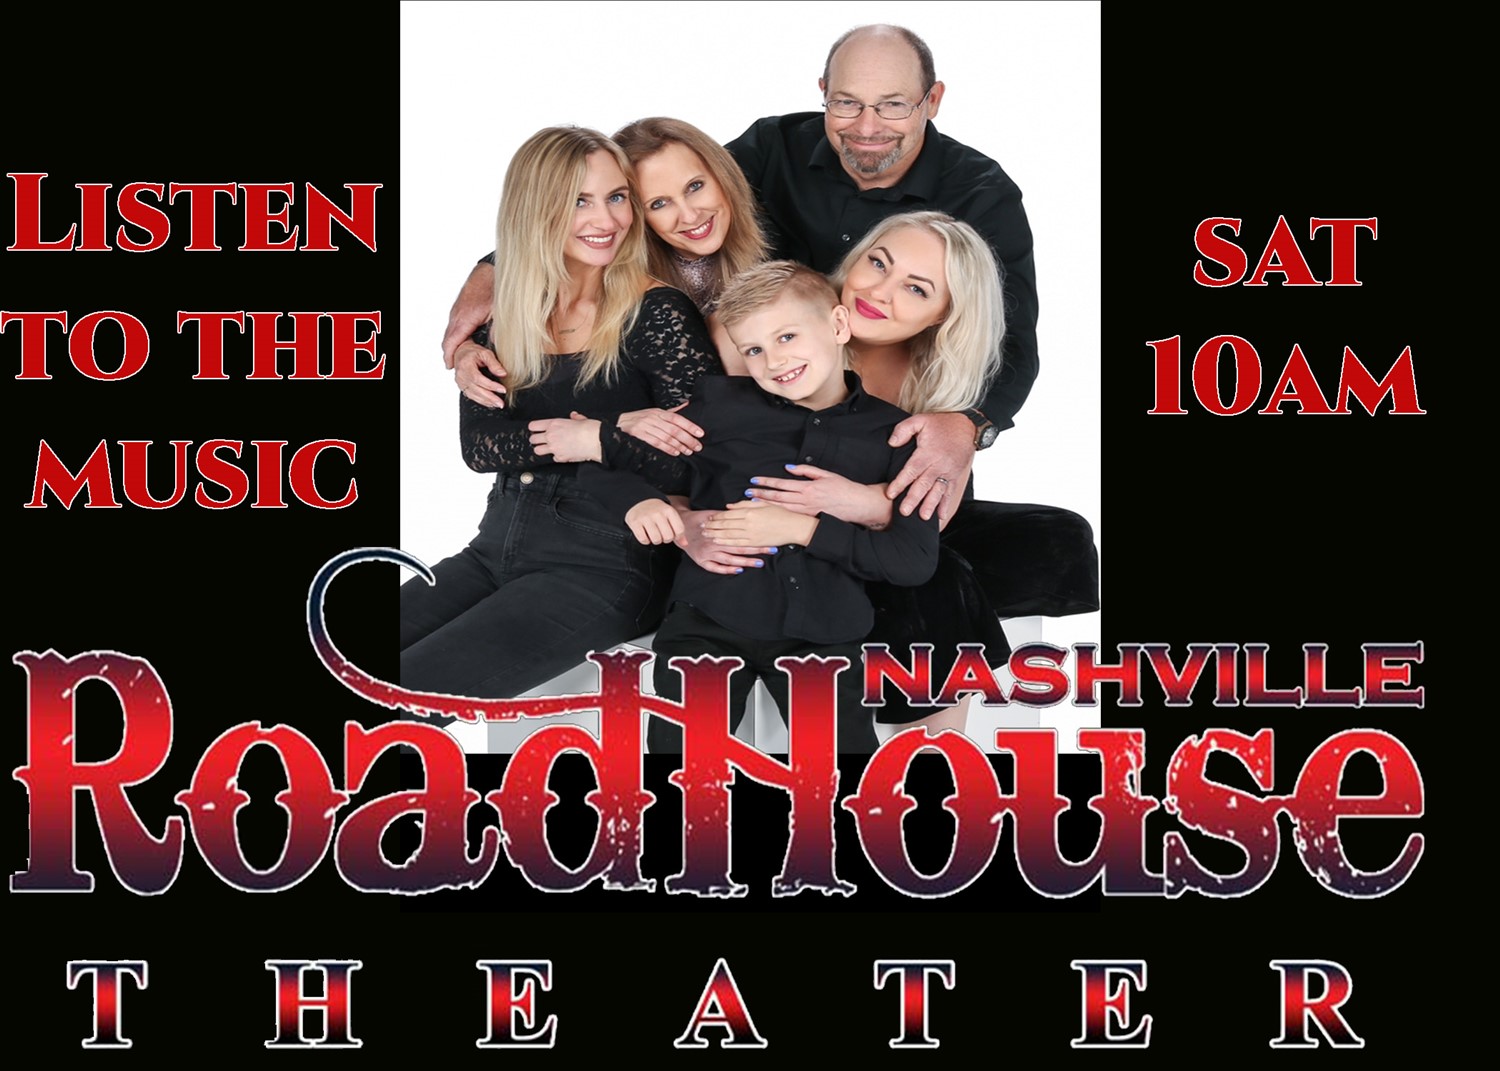 Listen To The Music  on dic. 19, 00:00@Nasvhille Roadhouse Theater at the Branson Star - Pick a seat, Buy tickets and Get information on nashvilleroadhouse.com bransonstartheater